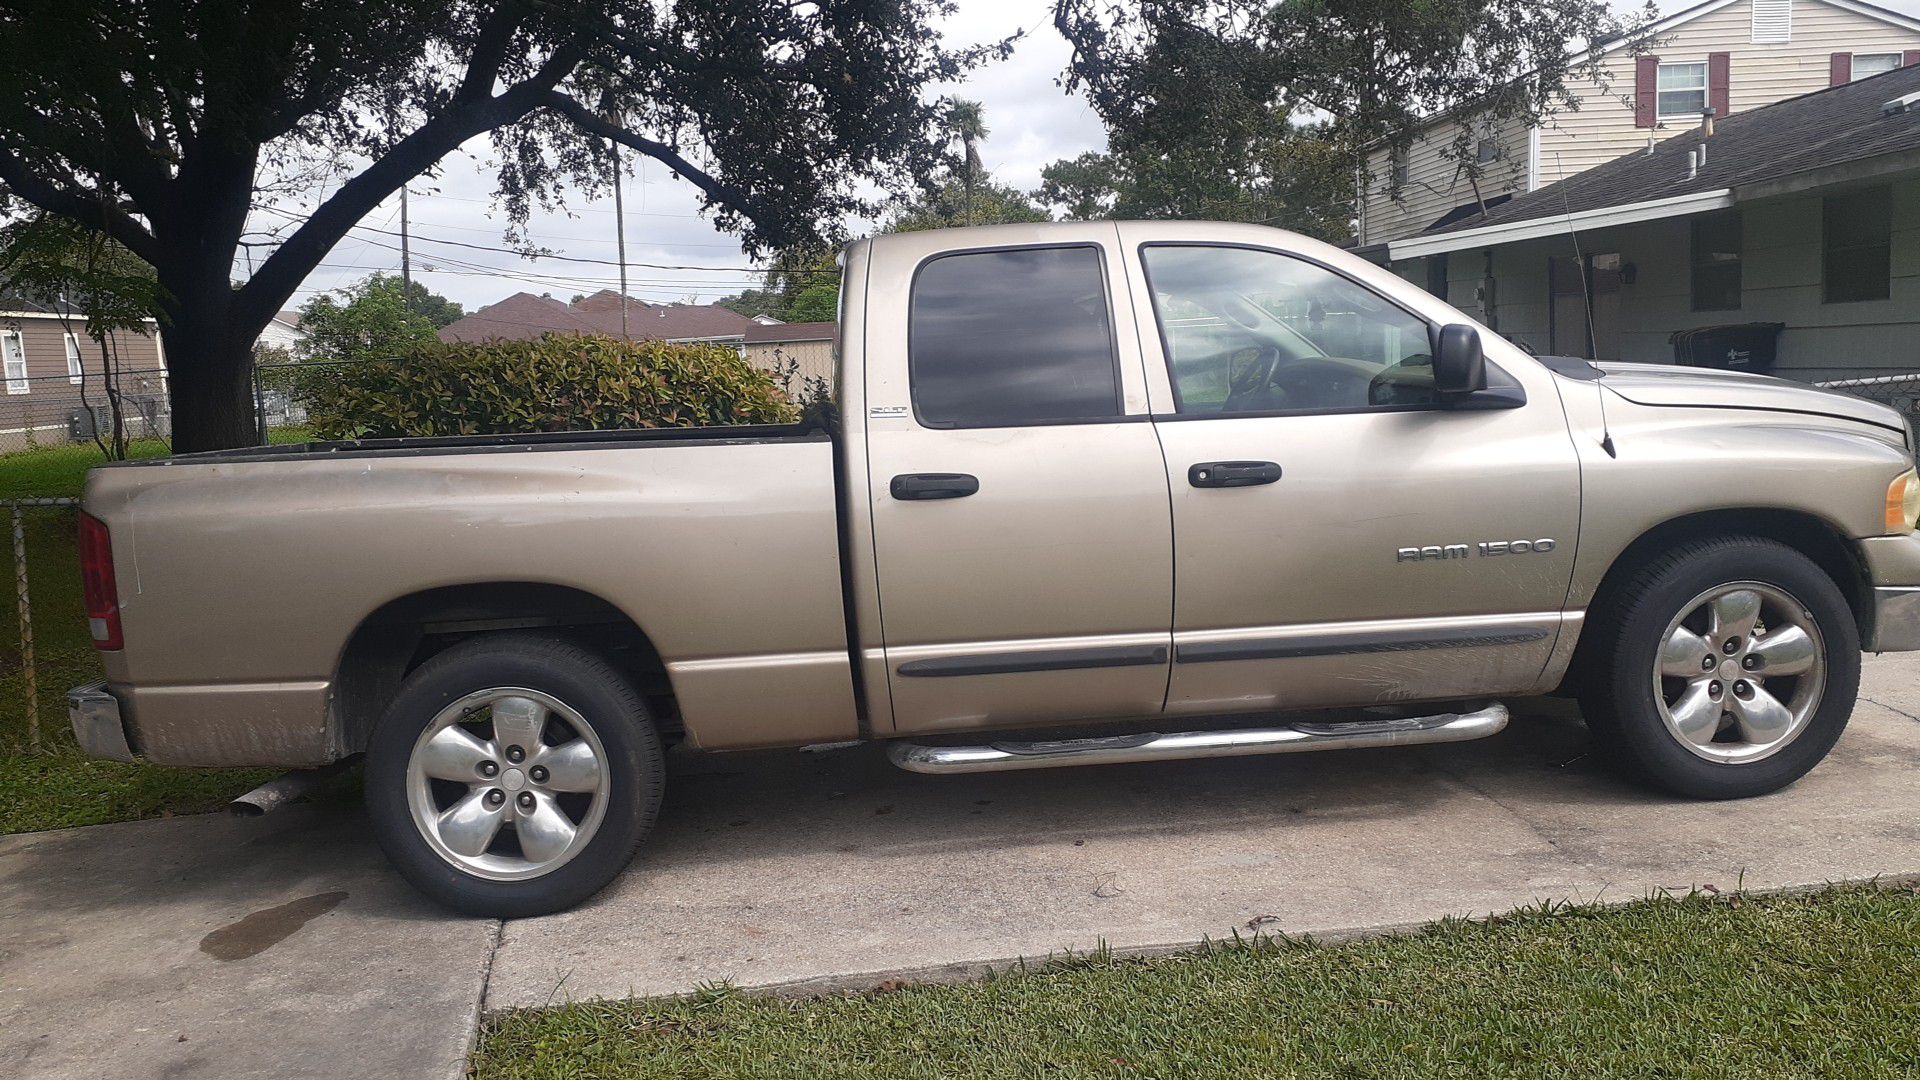 2002 1500 dodge ram I replace the motor 3 year ago runs great new tires I just want to sell it because I bought a new truck